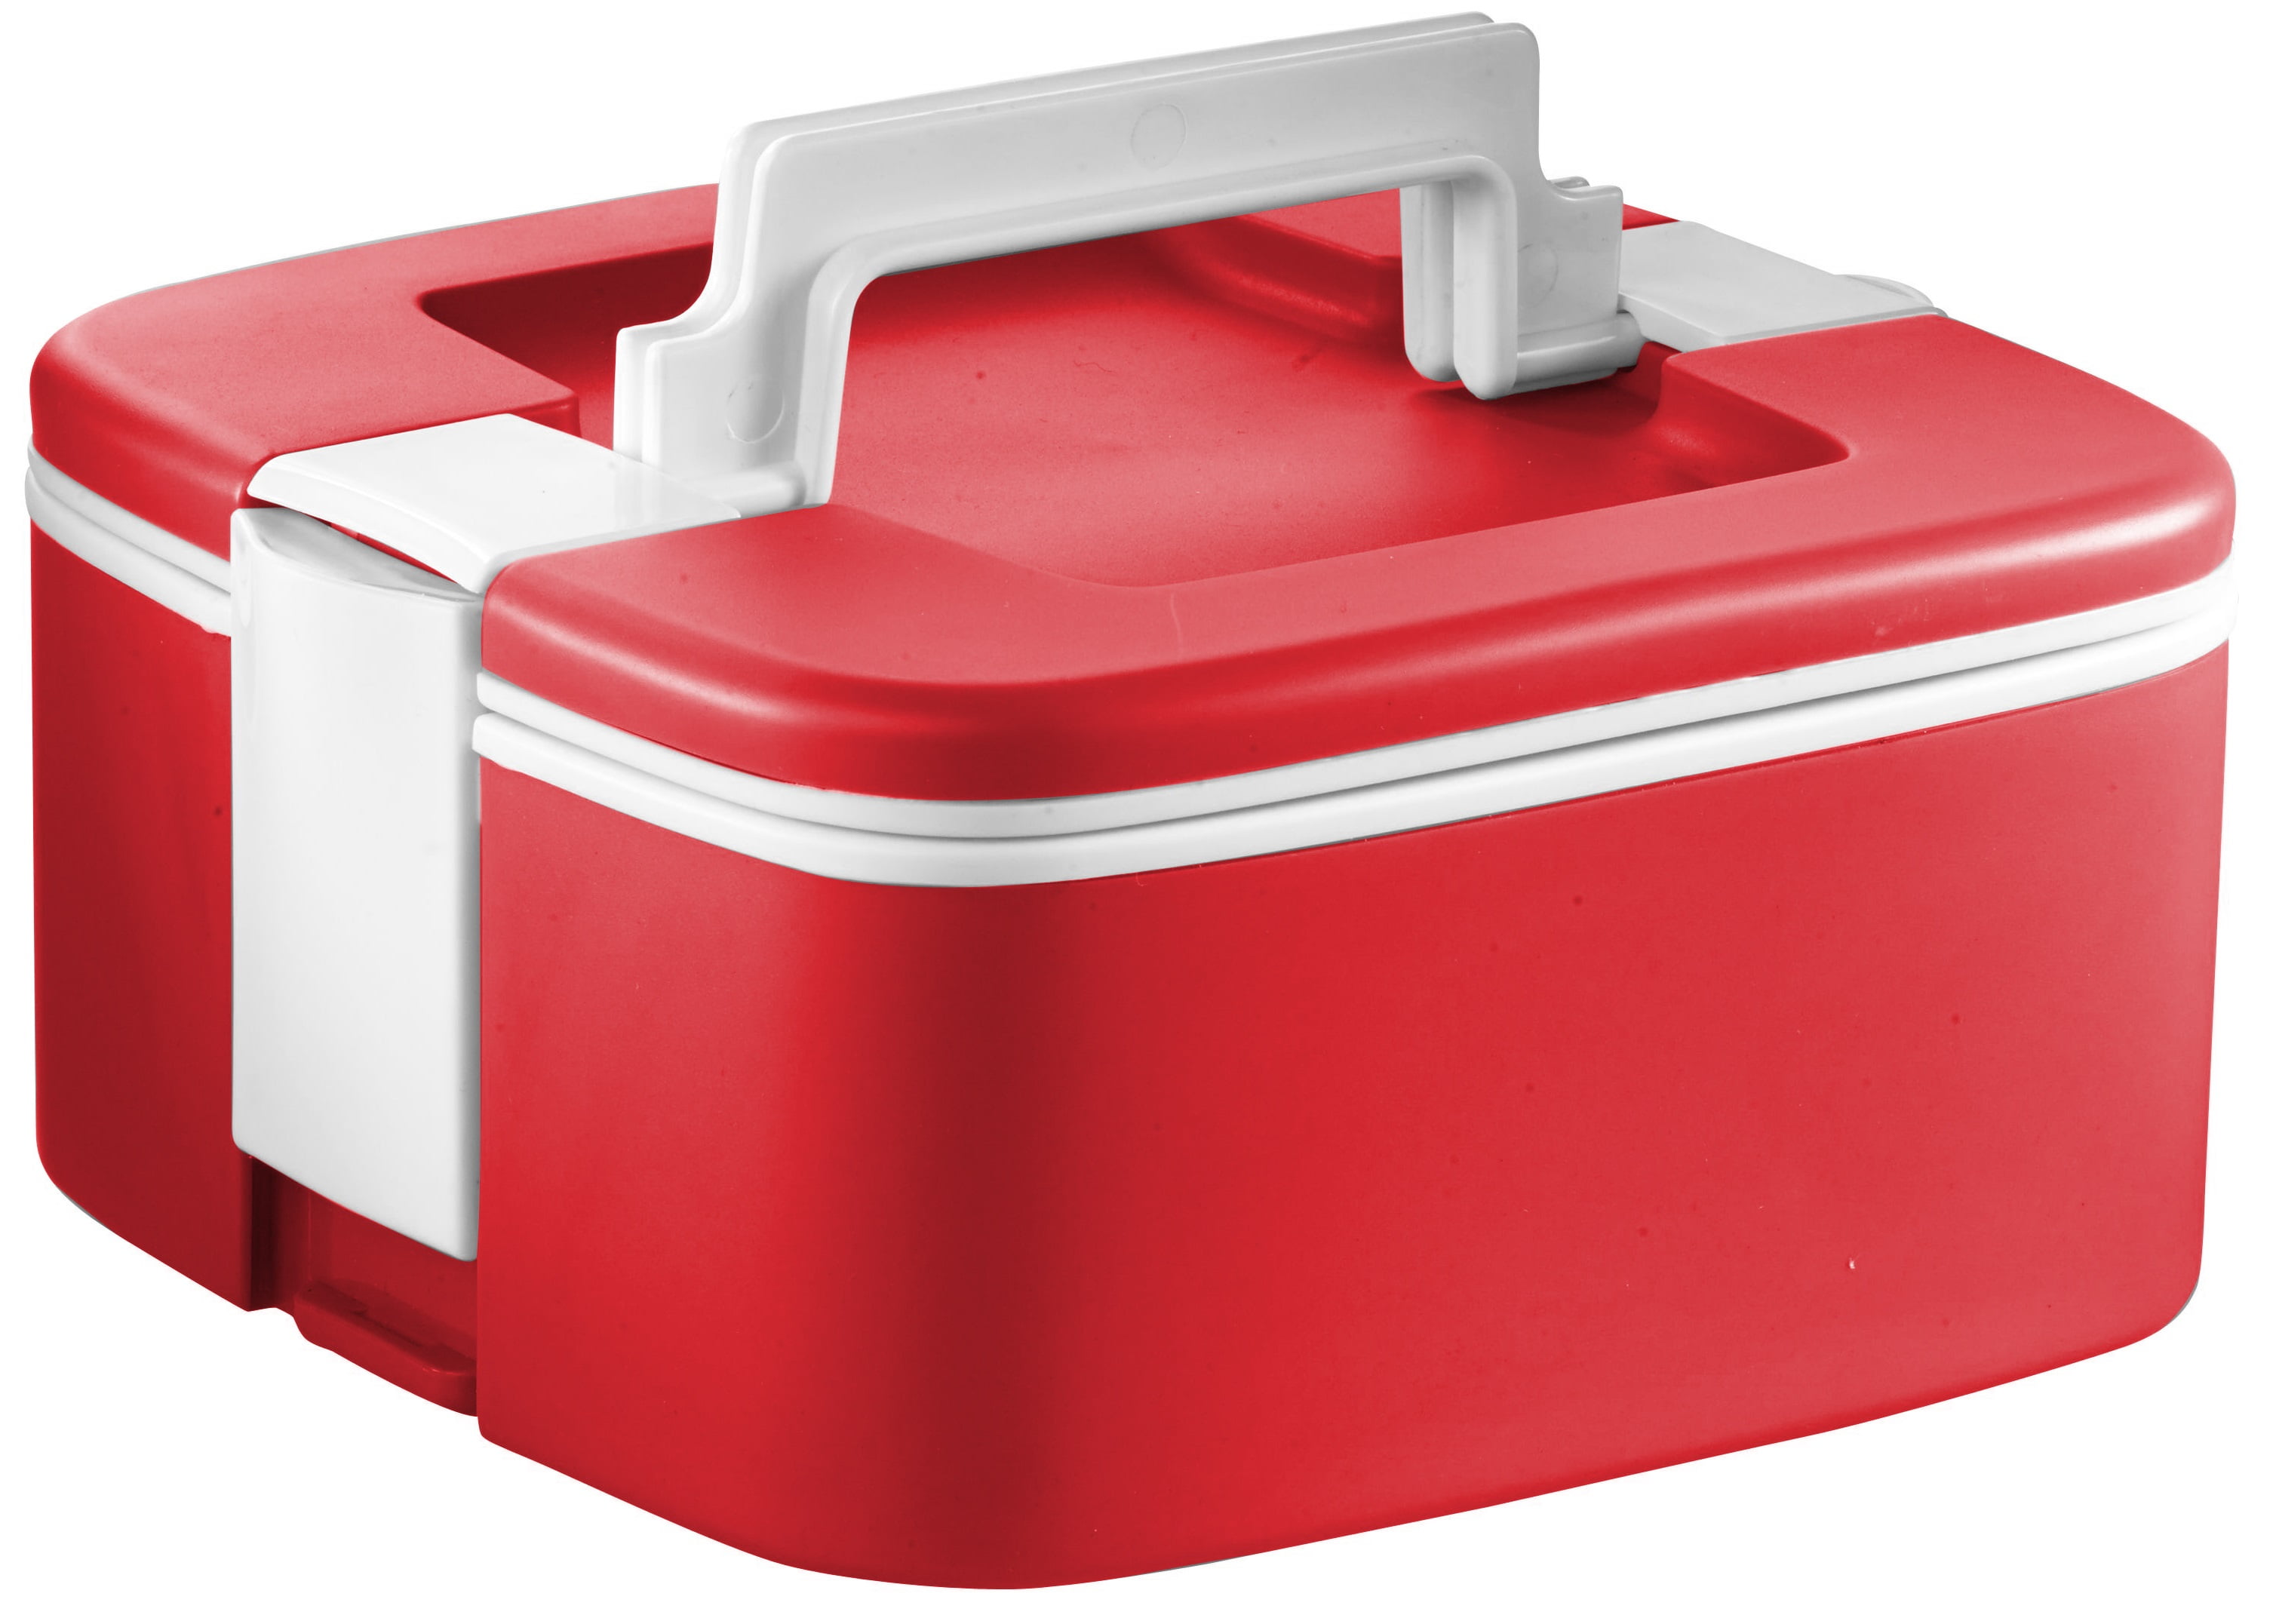 Ozeri ThermoMax Stackable Lunch Box and Double-wall Insulated Food